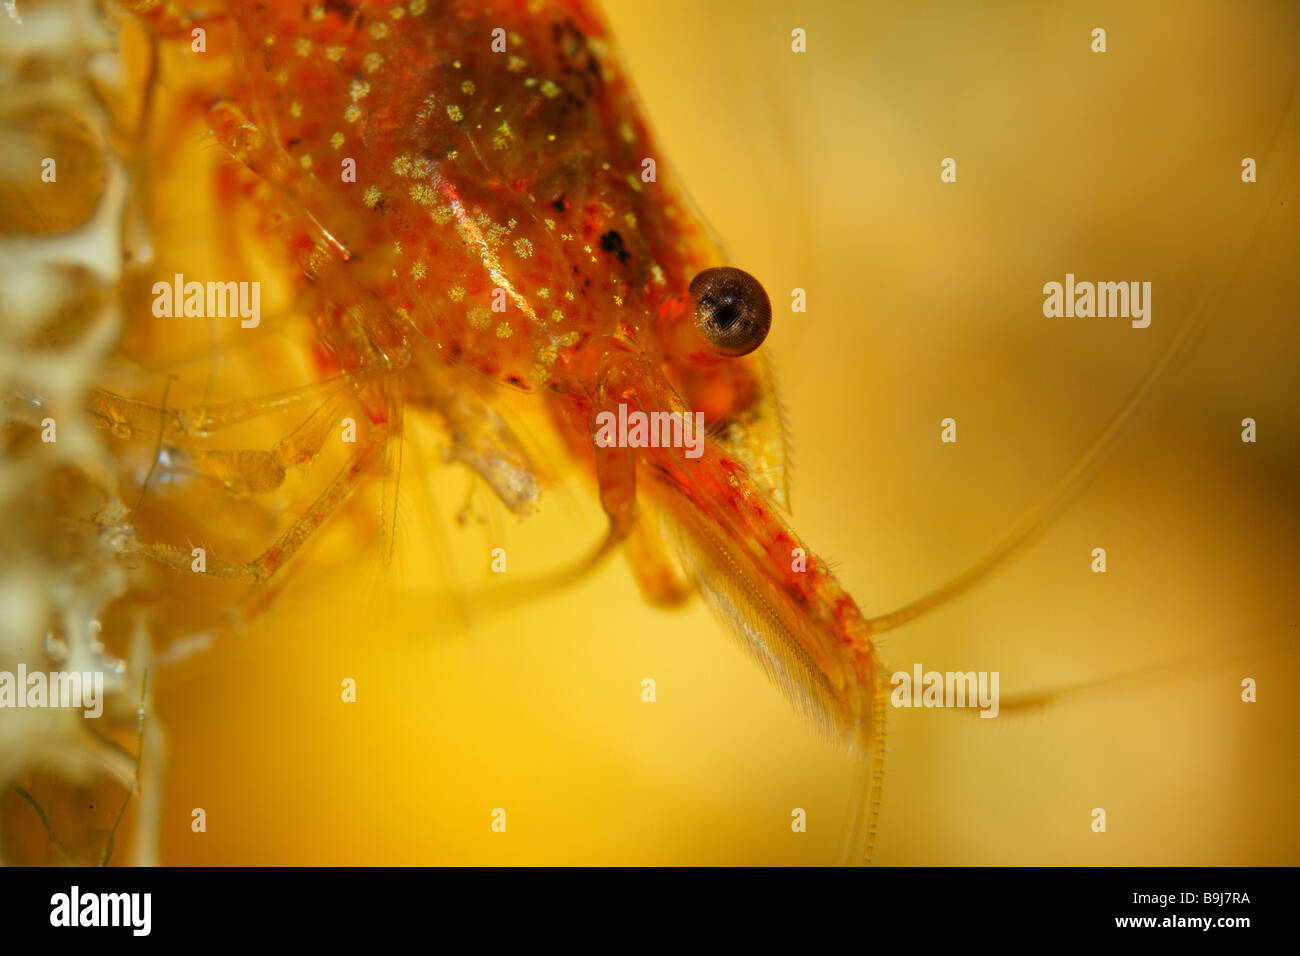 Mangrove Hairy-handed Prawn (Caridina propinqua) from Indonesia, close-up of the head, fresh water Stock Photo